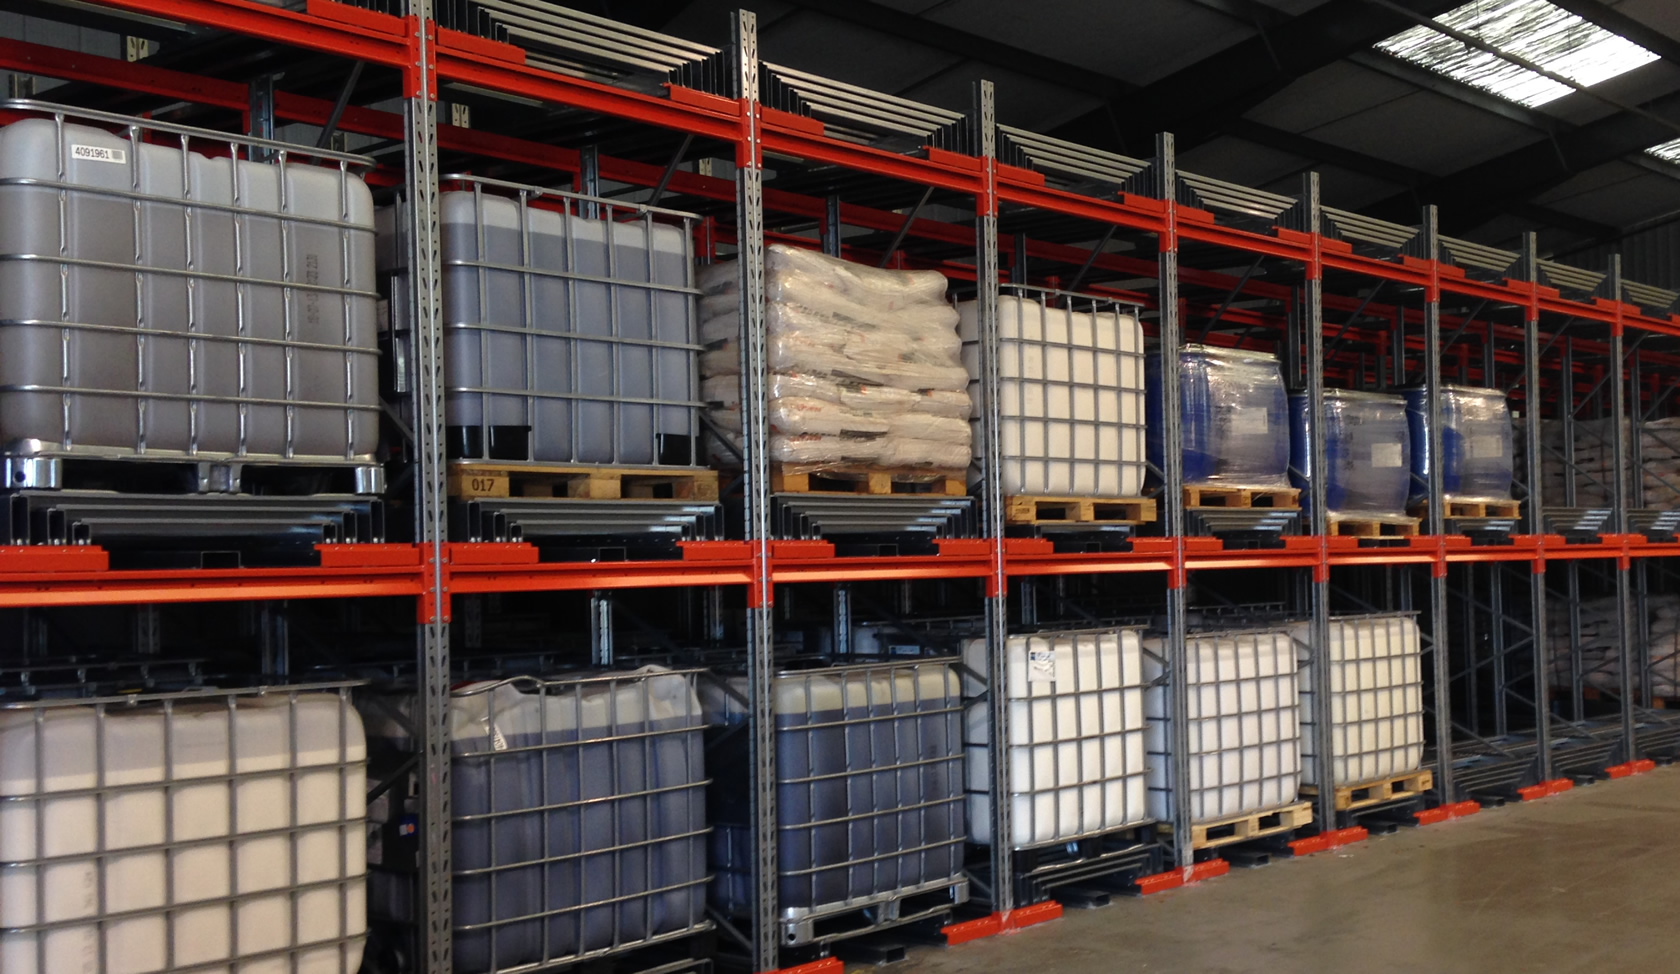 IBC pallet racking for warehouse which provided an IBC storage solution.